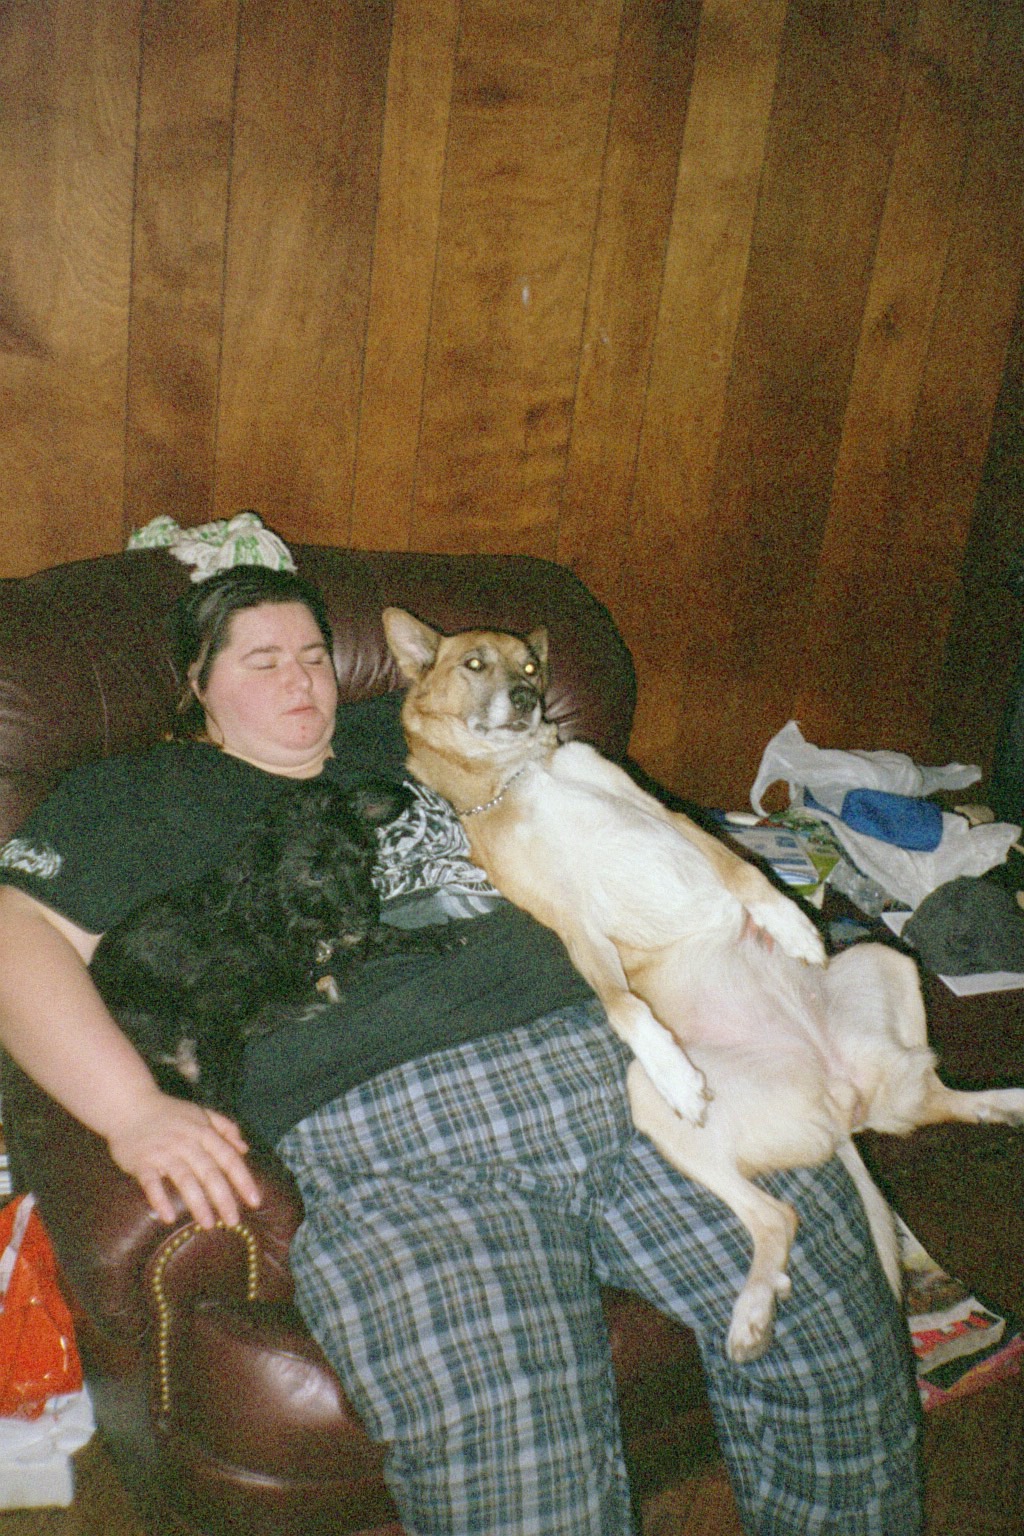 Winter 2005 with me holding my dog Cheyenne and my friend's dog Ebby on my lap